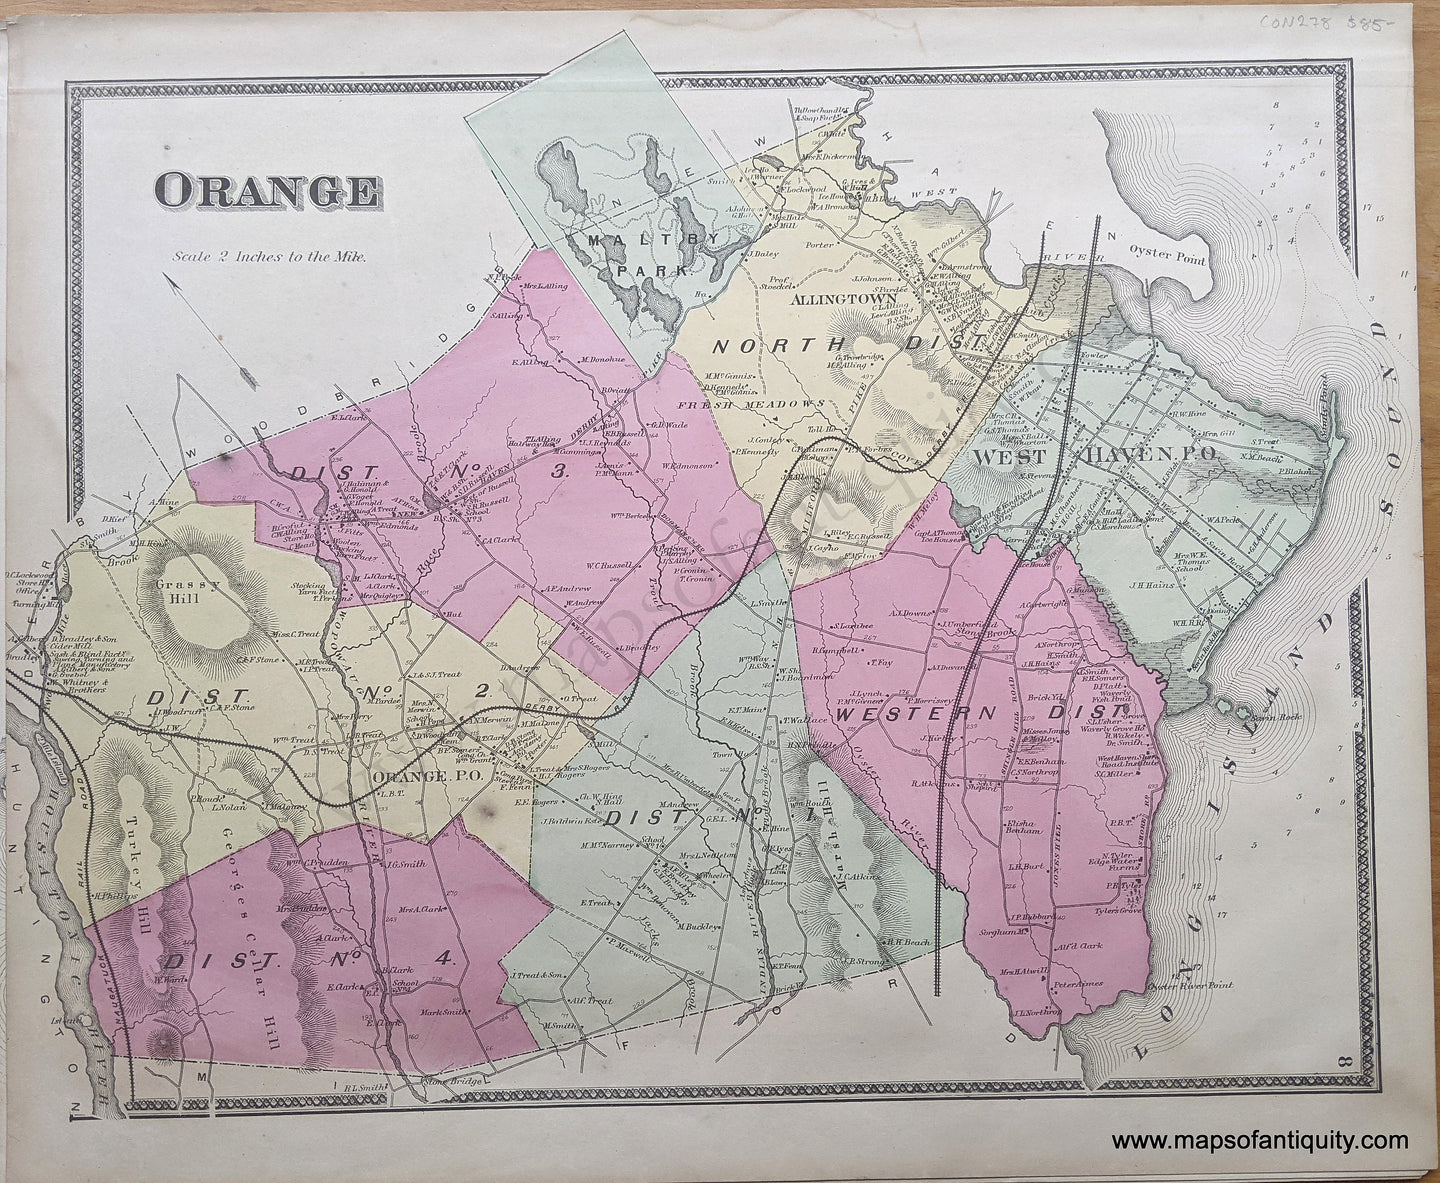 Antique-Hand-Colored-Map-Orange-(CT)-United-States-Connecticut-1868-Beers-Maps-Of-Antiquity